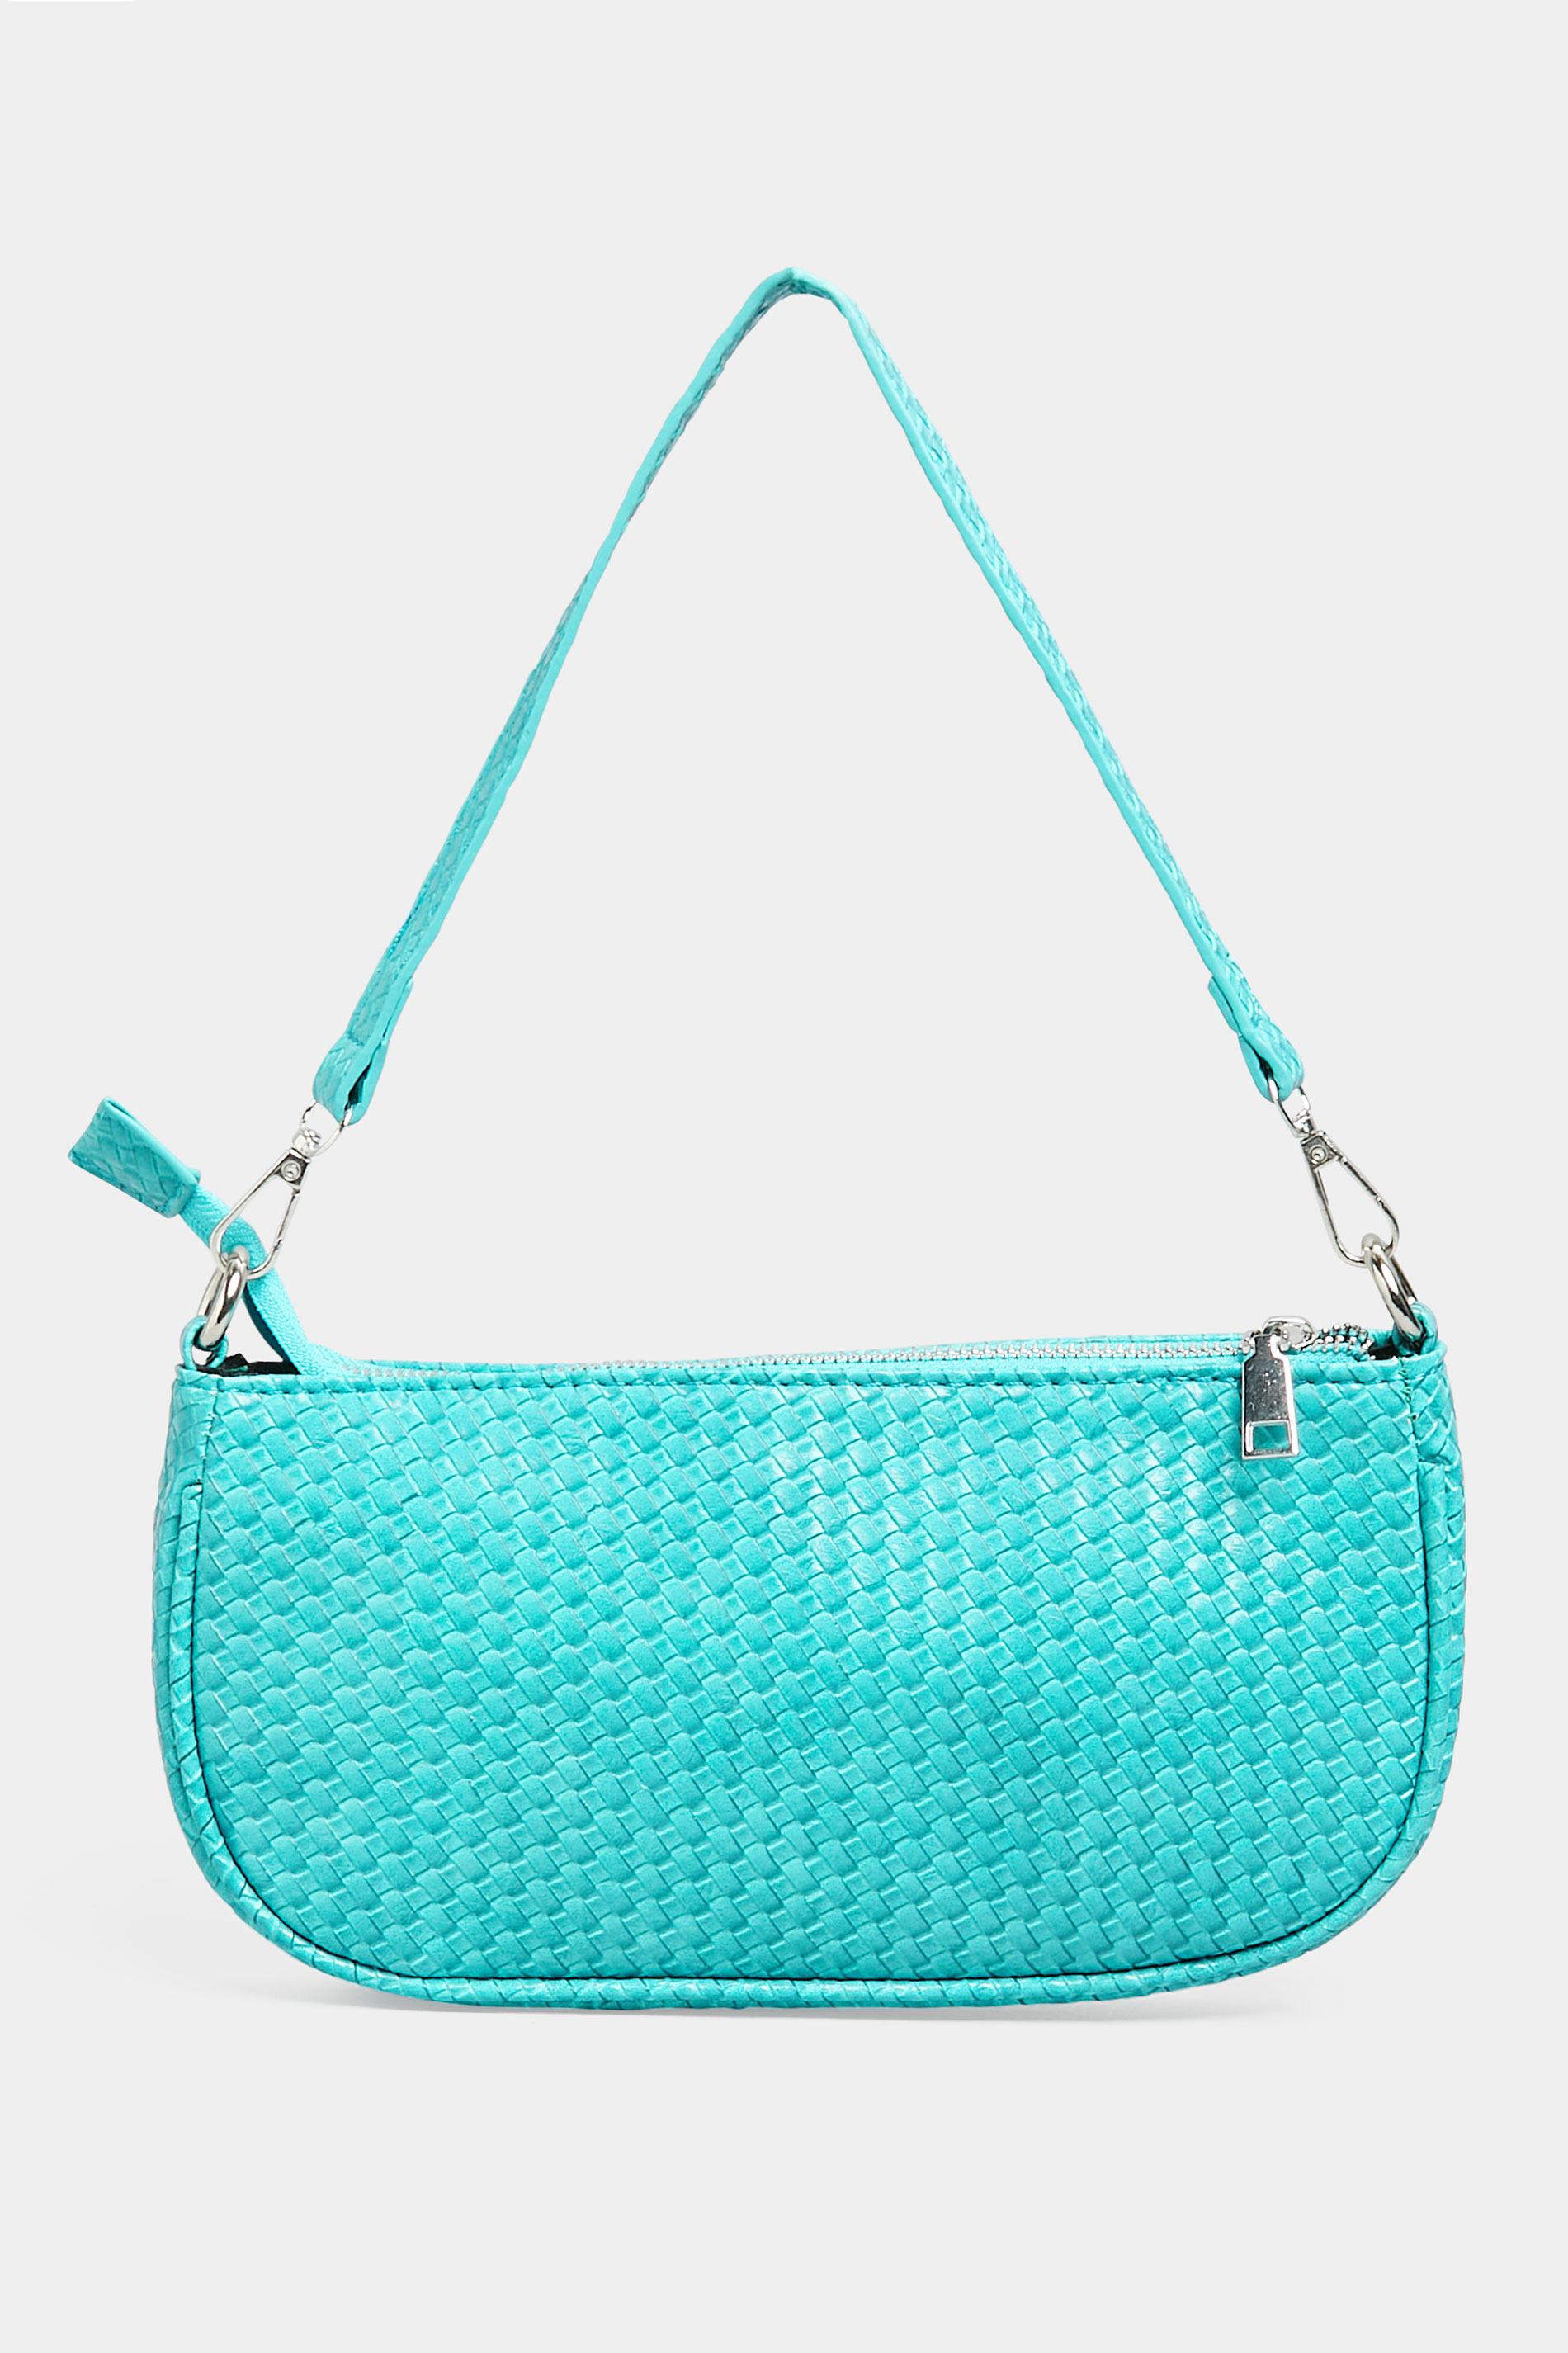 Turquoise Blue Woven Shoulder Bag | Yours Clothing 3